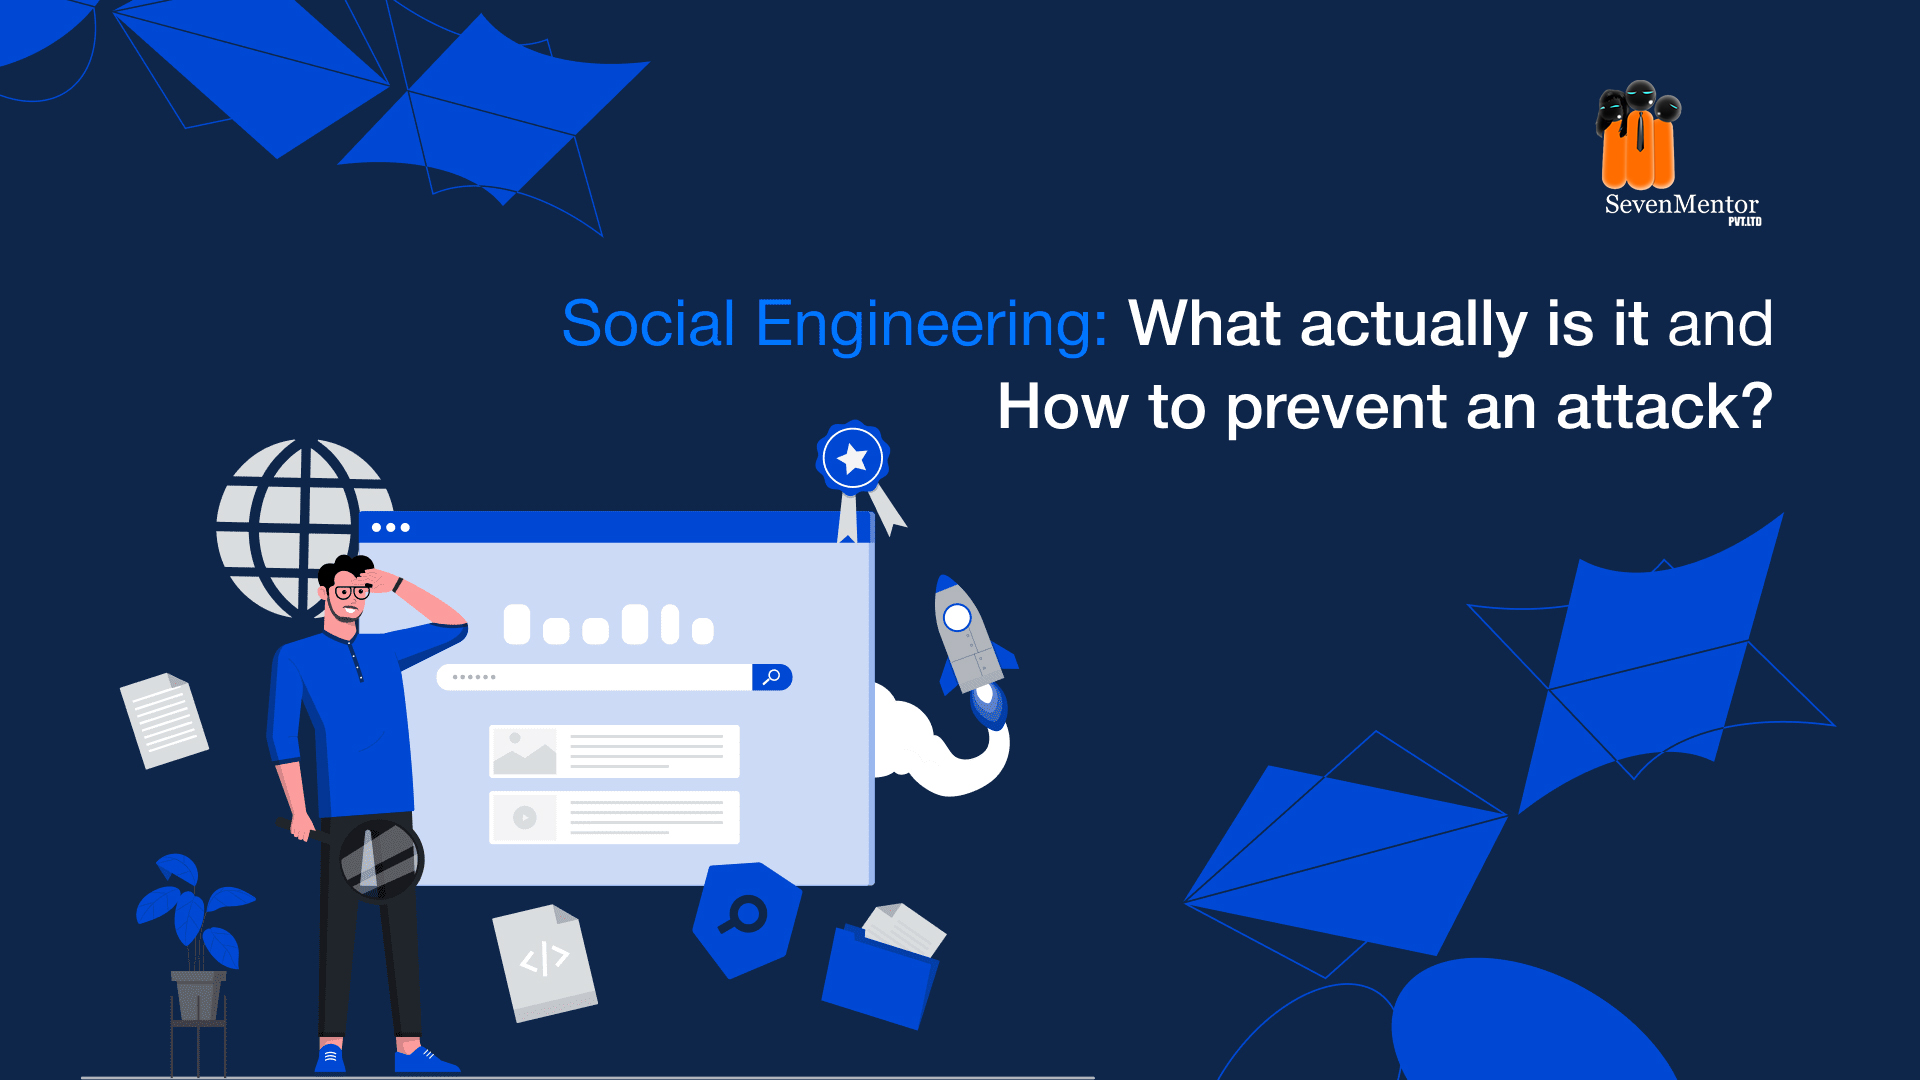 SOCIAL ENGINEERING ATTACK AND PREVENTION